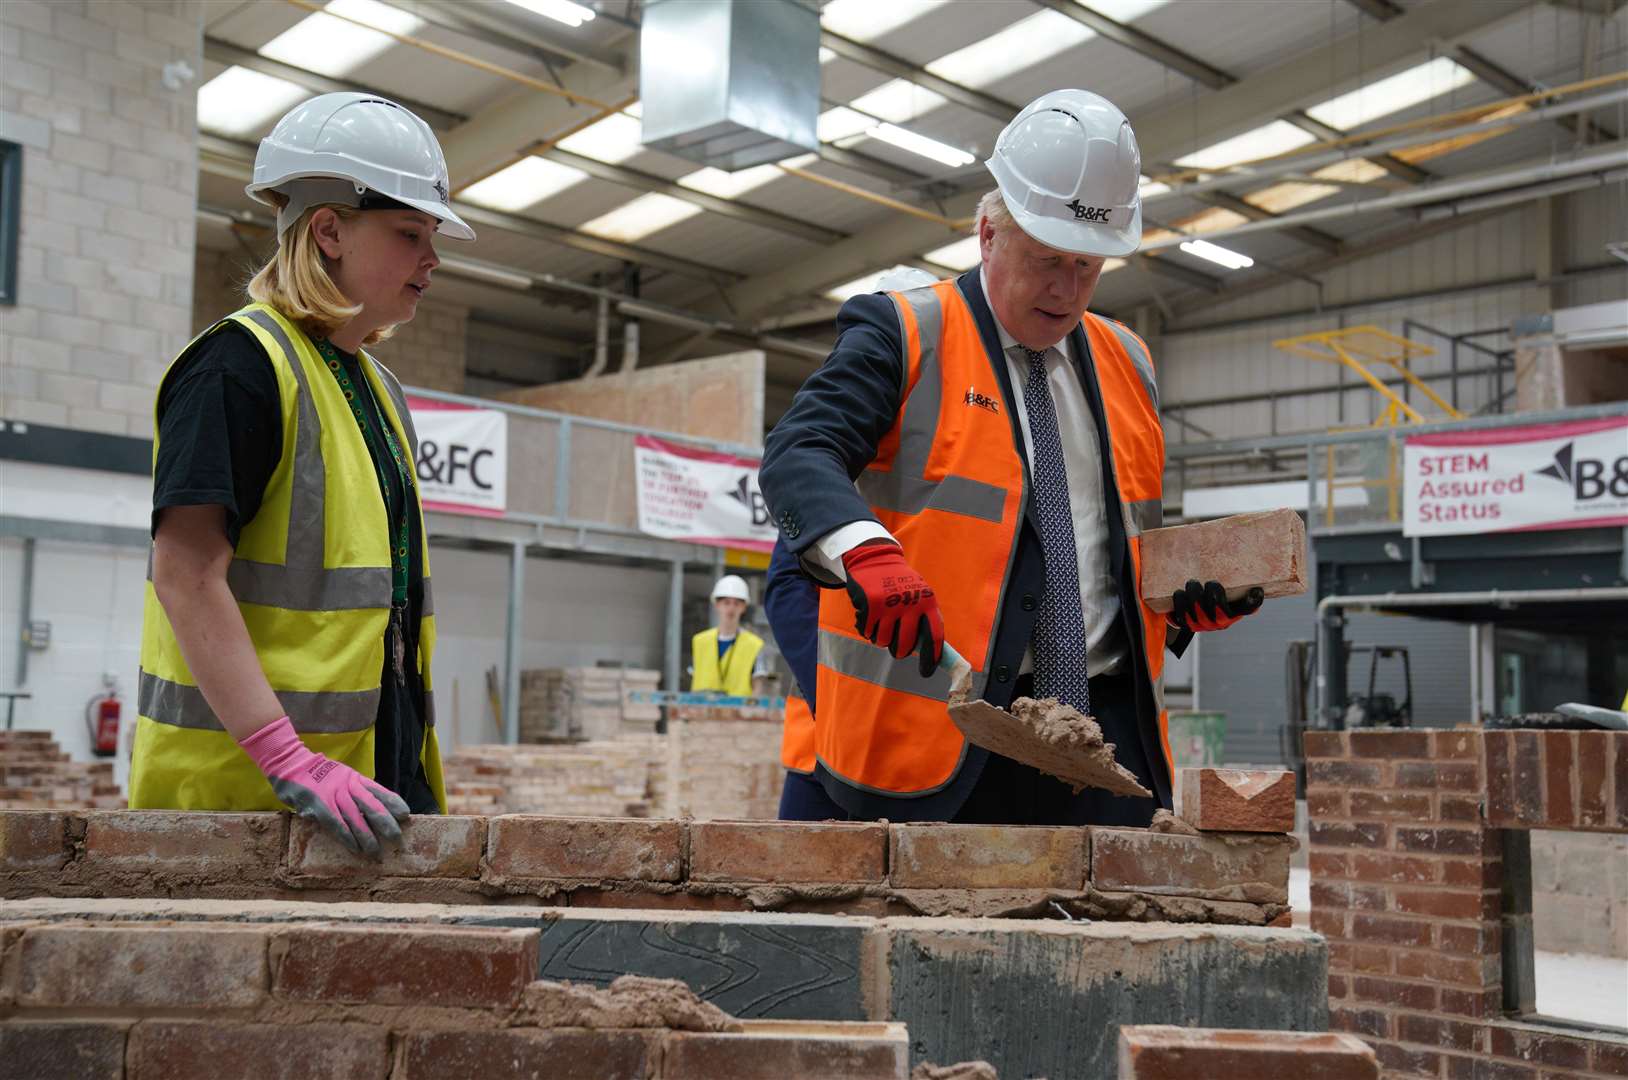 Boris Johnson takes part in a bricklaying lesson at Blackpool and The Fylde College (Peter Byrne/PA)